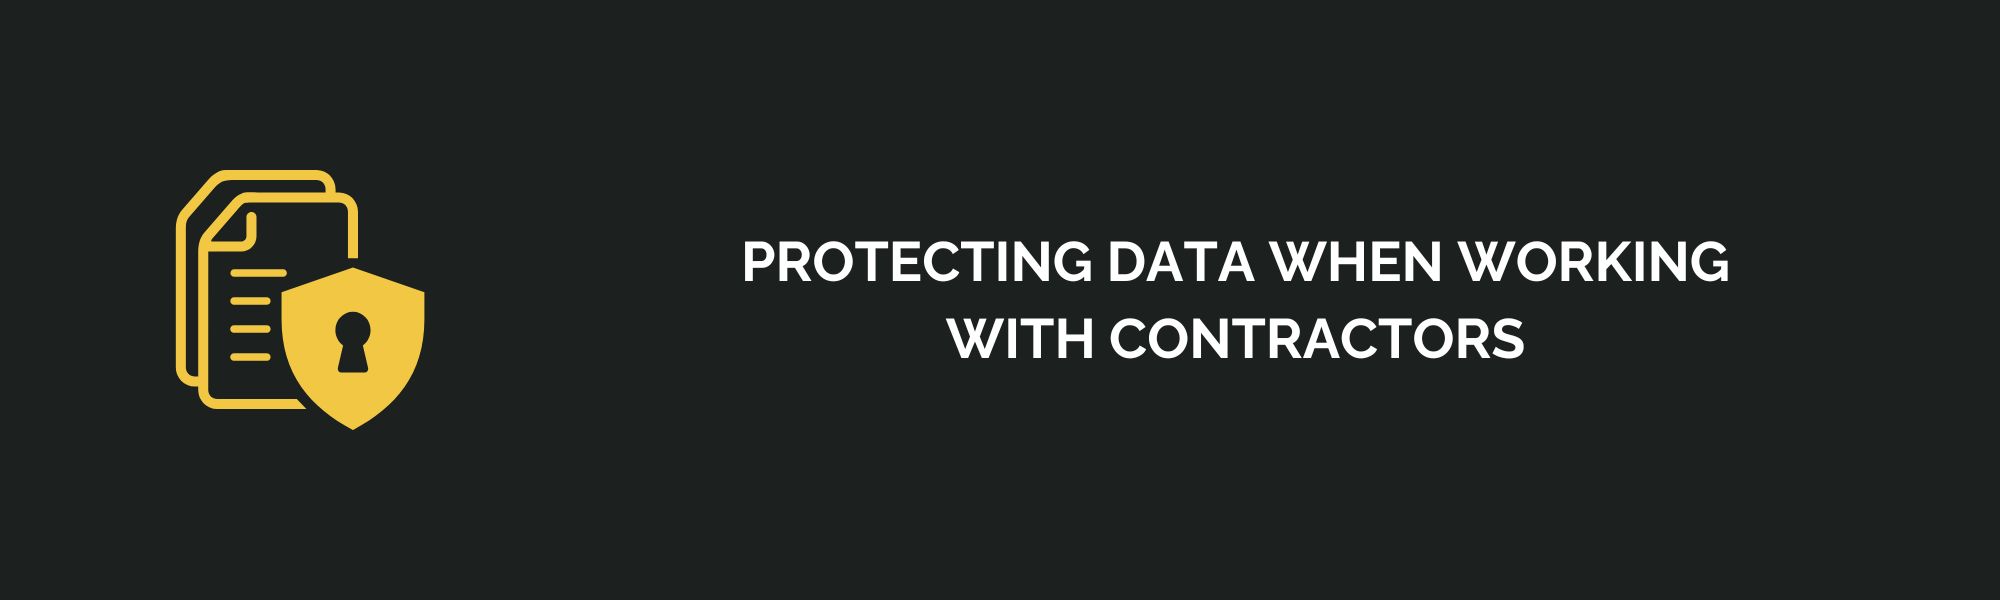 Protecting Data When Working With Contractors(2)